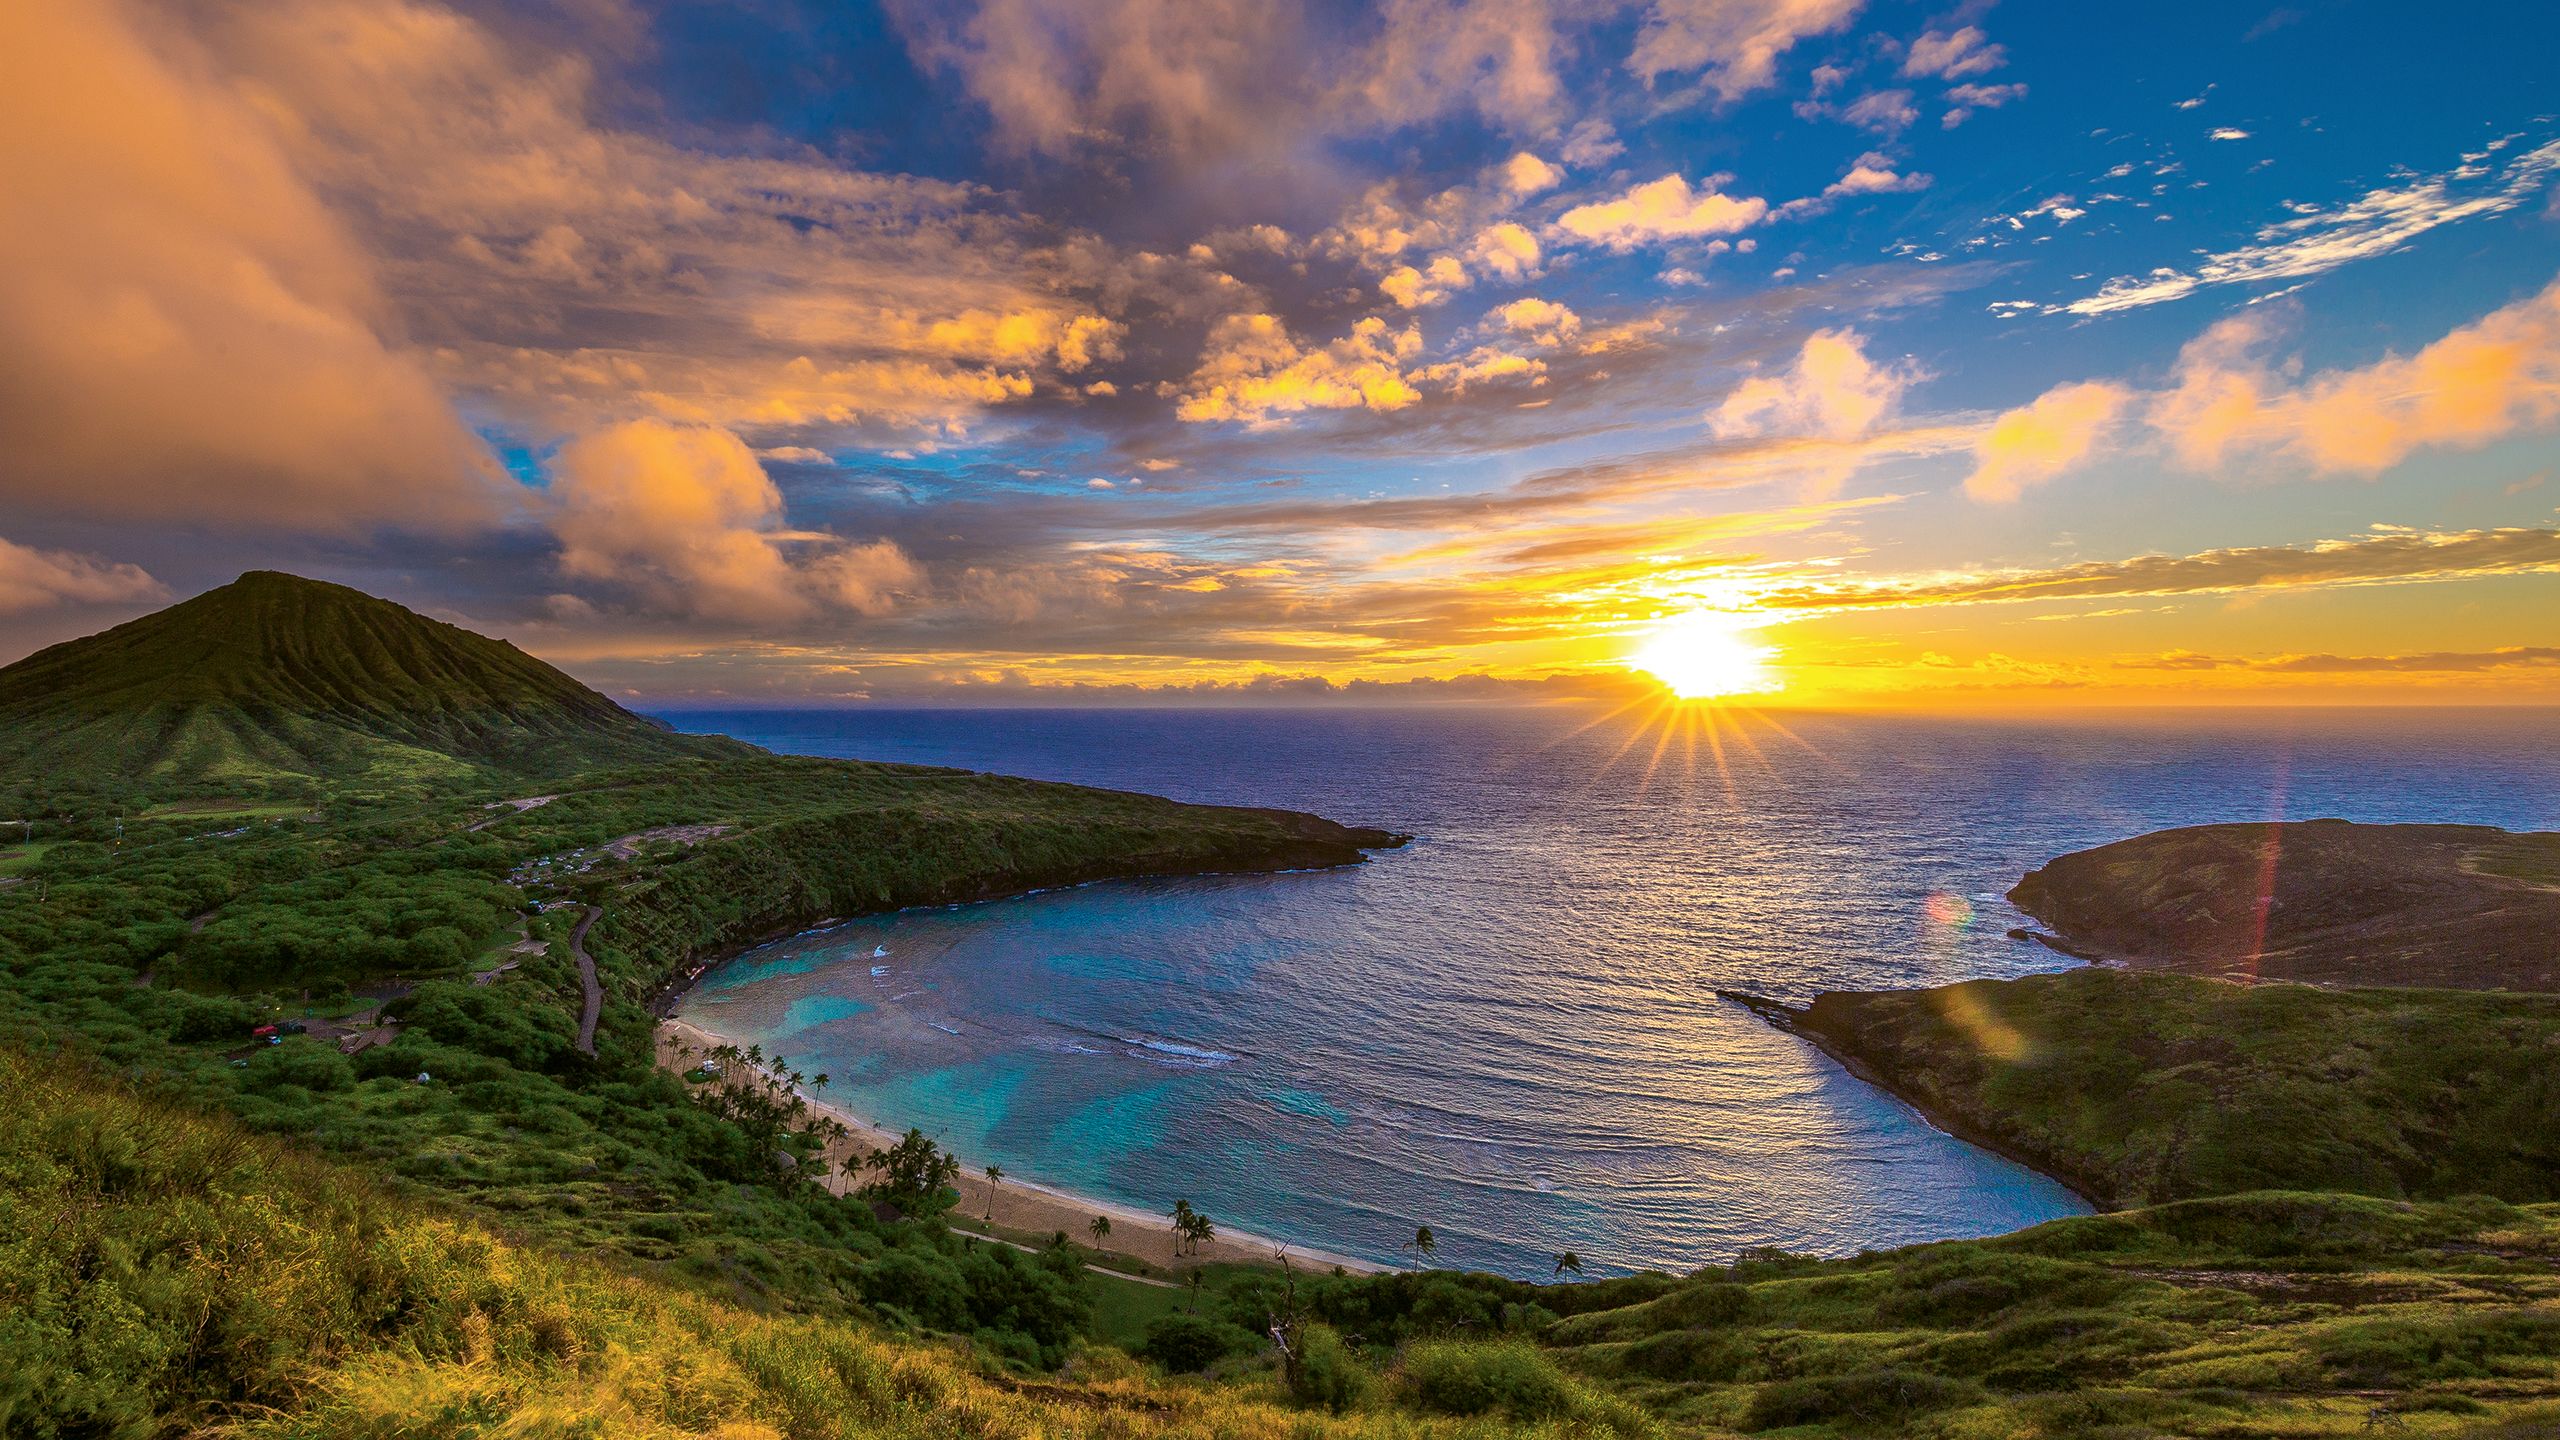 Sunrise from Hanauma Bay Nature Preserve on Oahu. The park is closed one day a week, and first-time visitors must watch a video on safety and conservation. Photo by Shane Myers Photography/Shutterstock.com